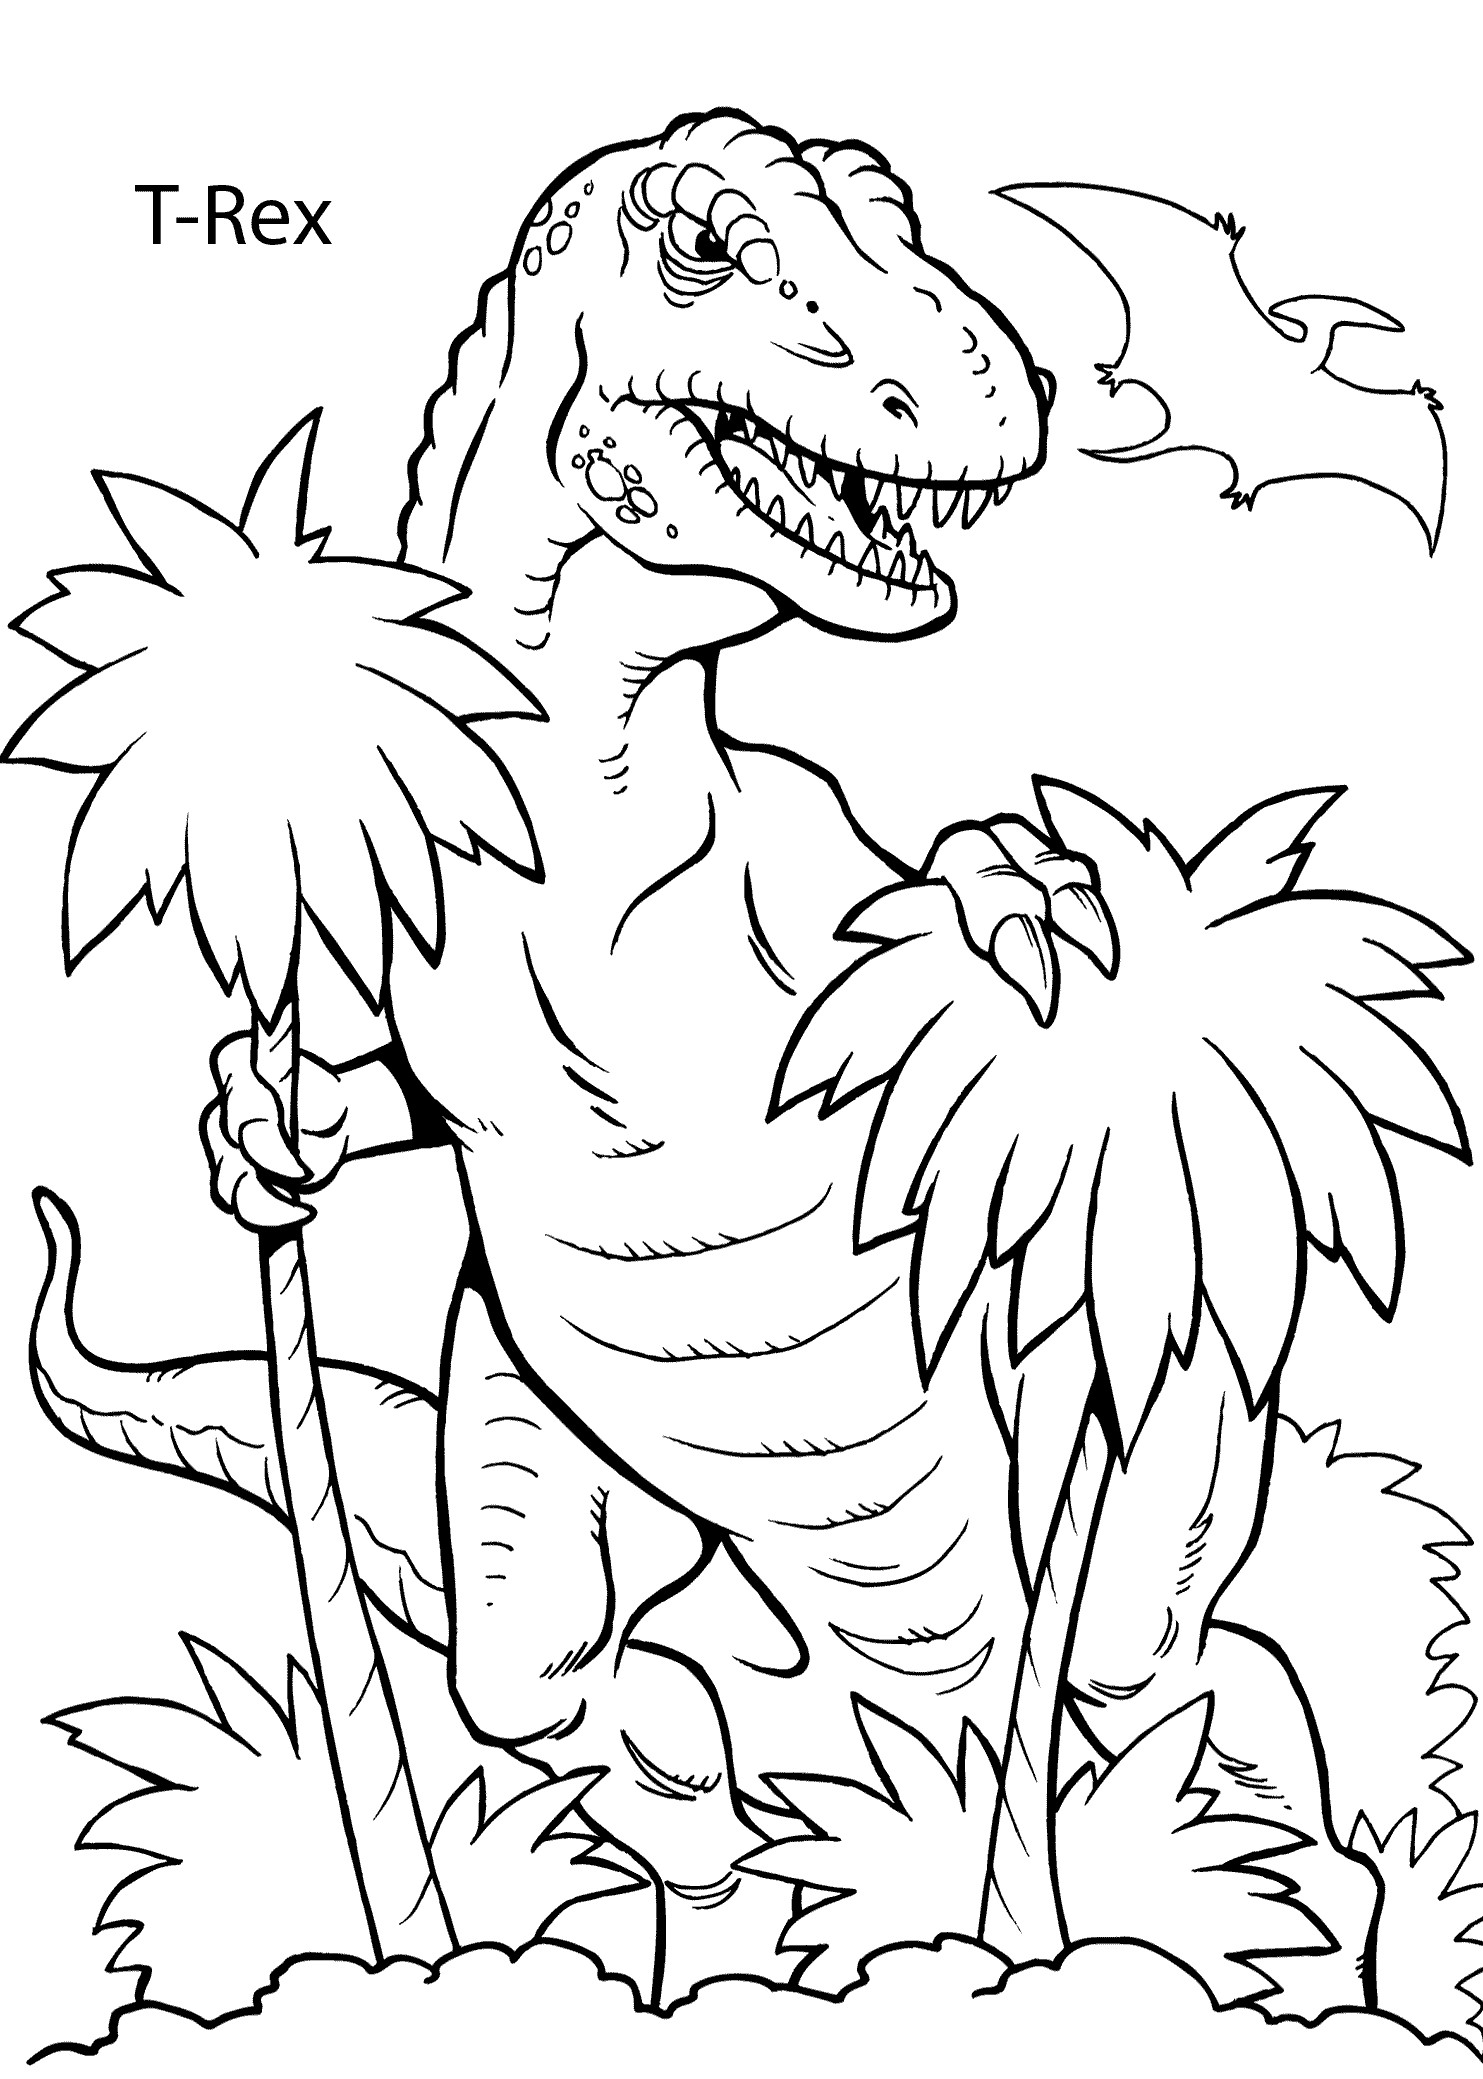 Coloring Pages For Boys Dinosaur
 T Rex dinosaur coloring pages for kids printable free